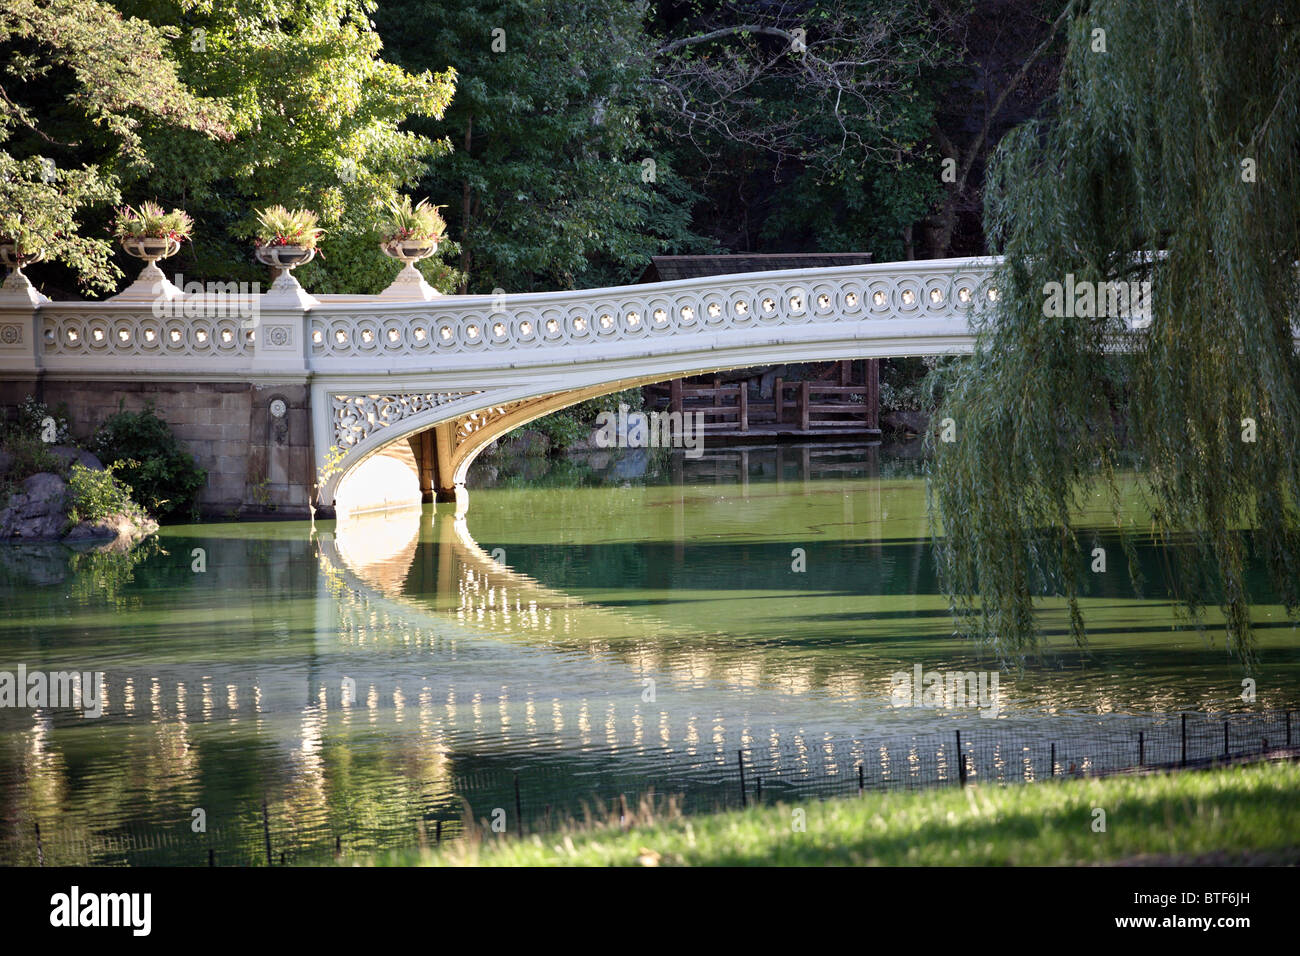 Bow Bridge reflected in the water of the Lake, Central Park, New York, USA Stock Photo